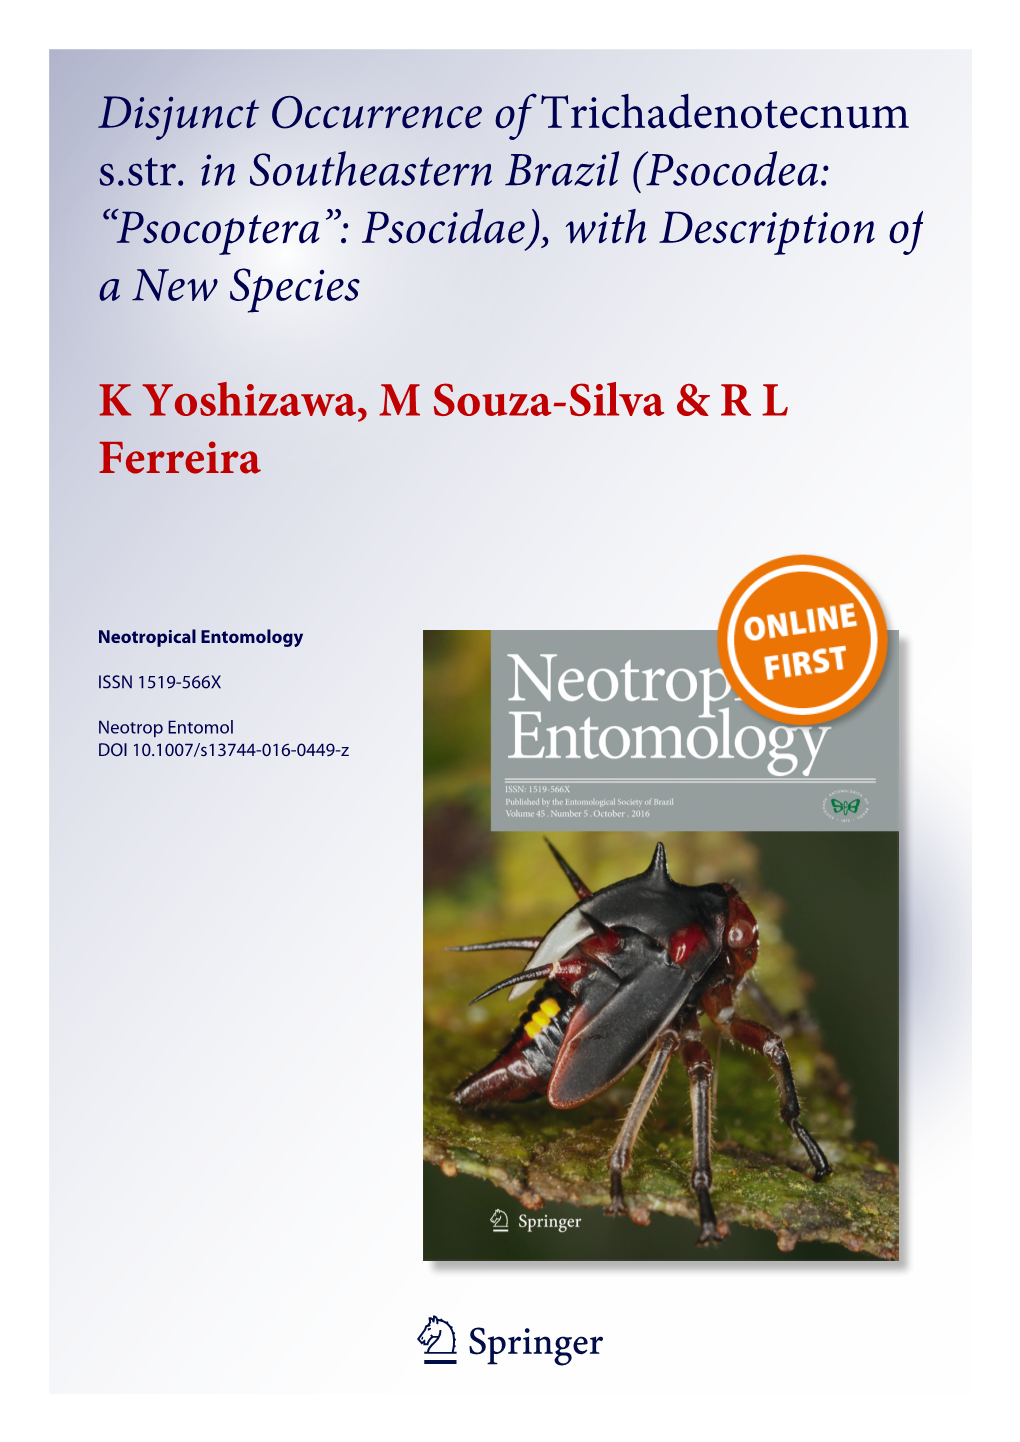 Psocodea: “Psocoptera”: Psocidae), with Description of a New Species